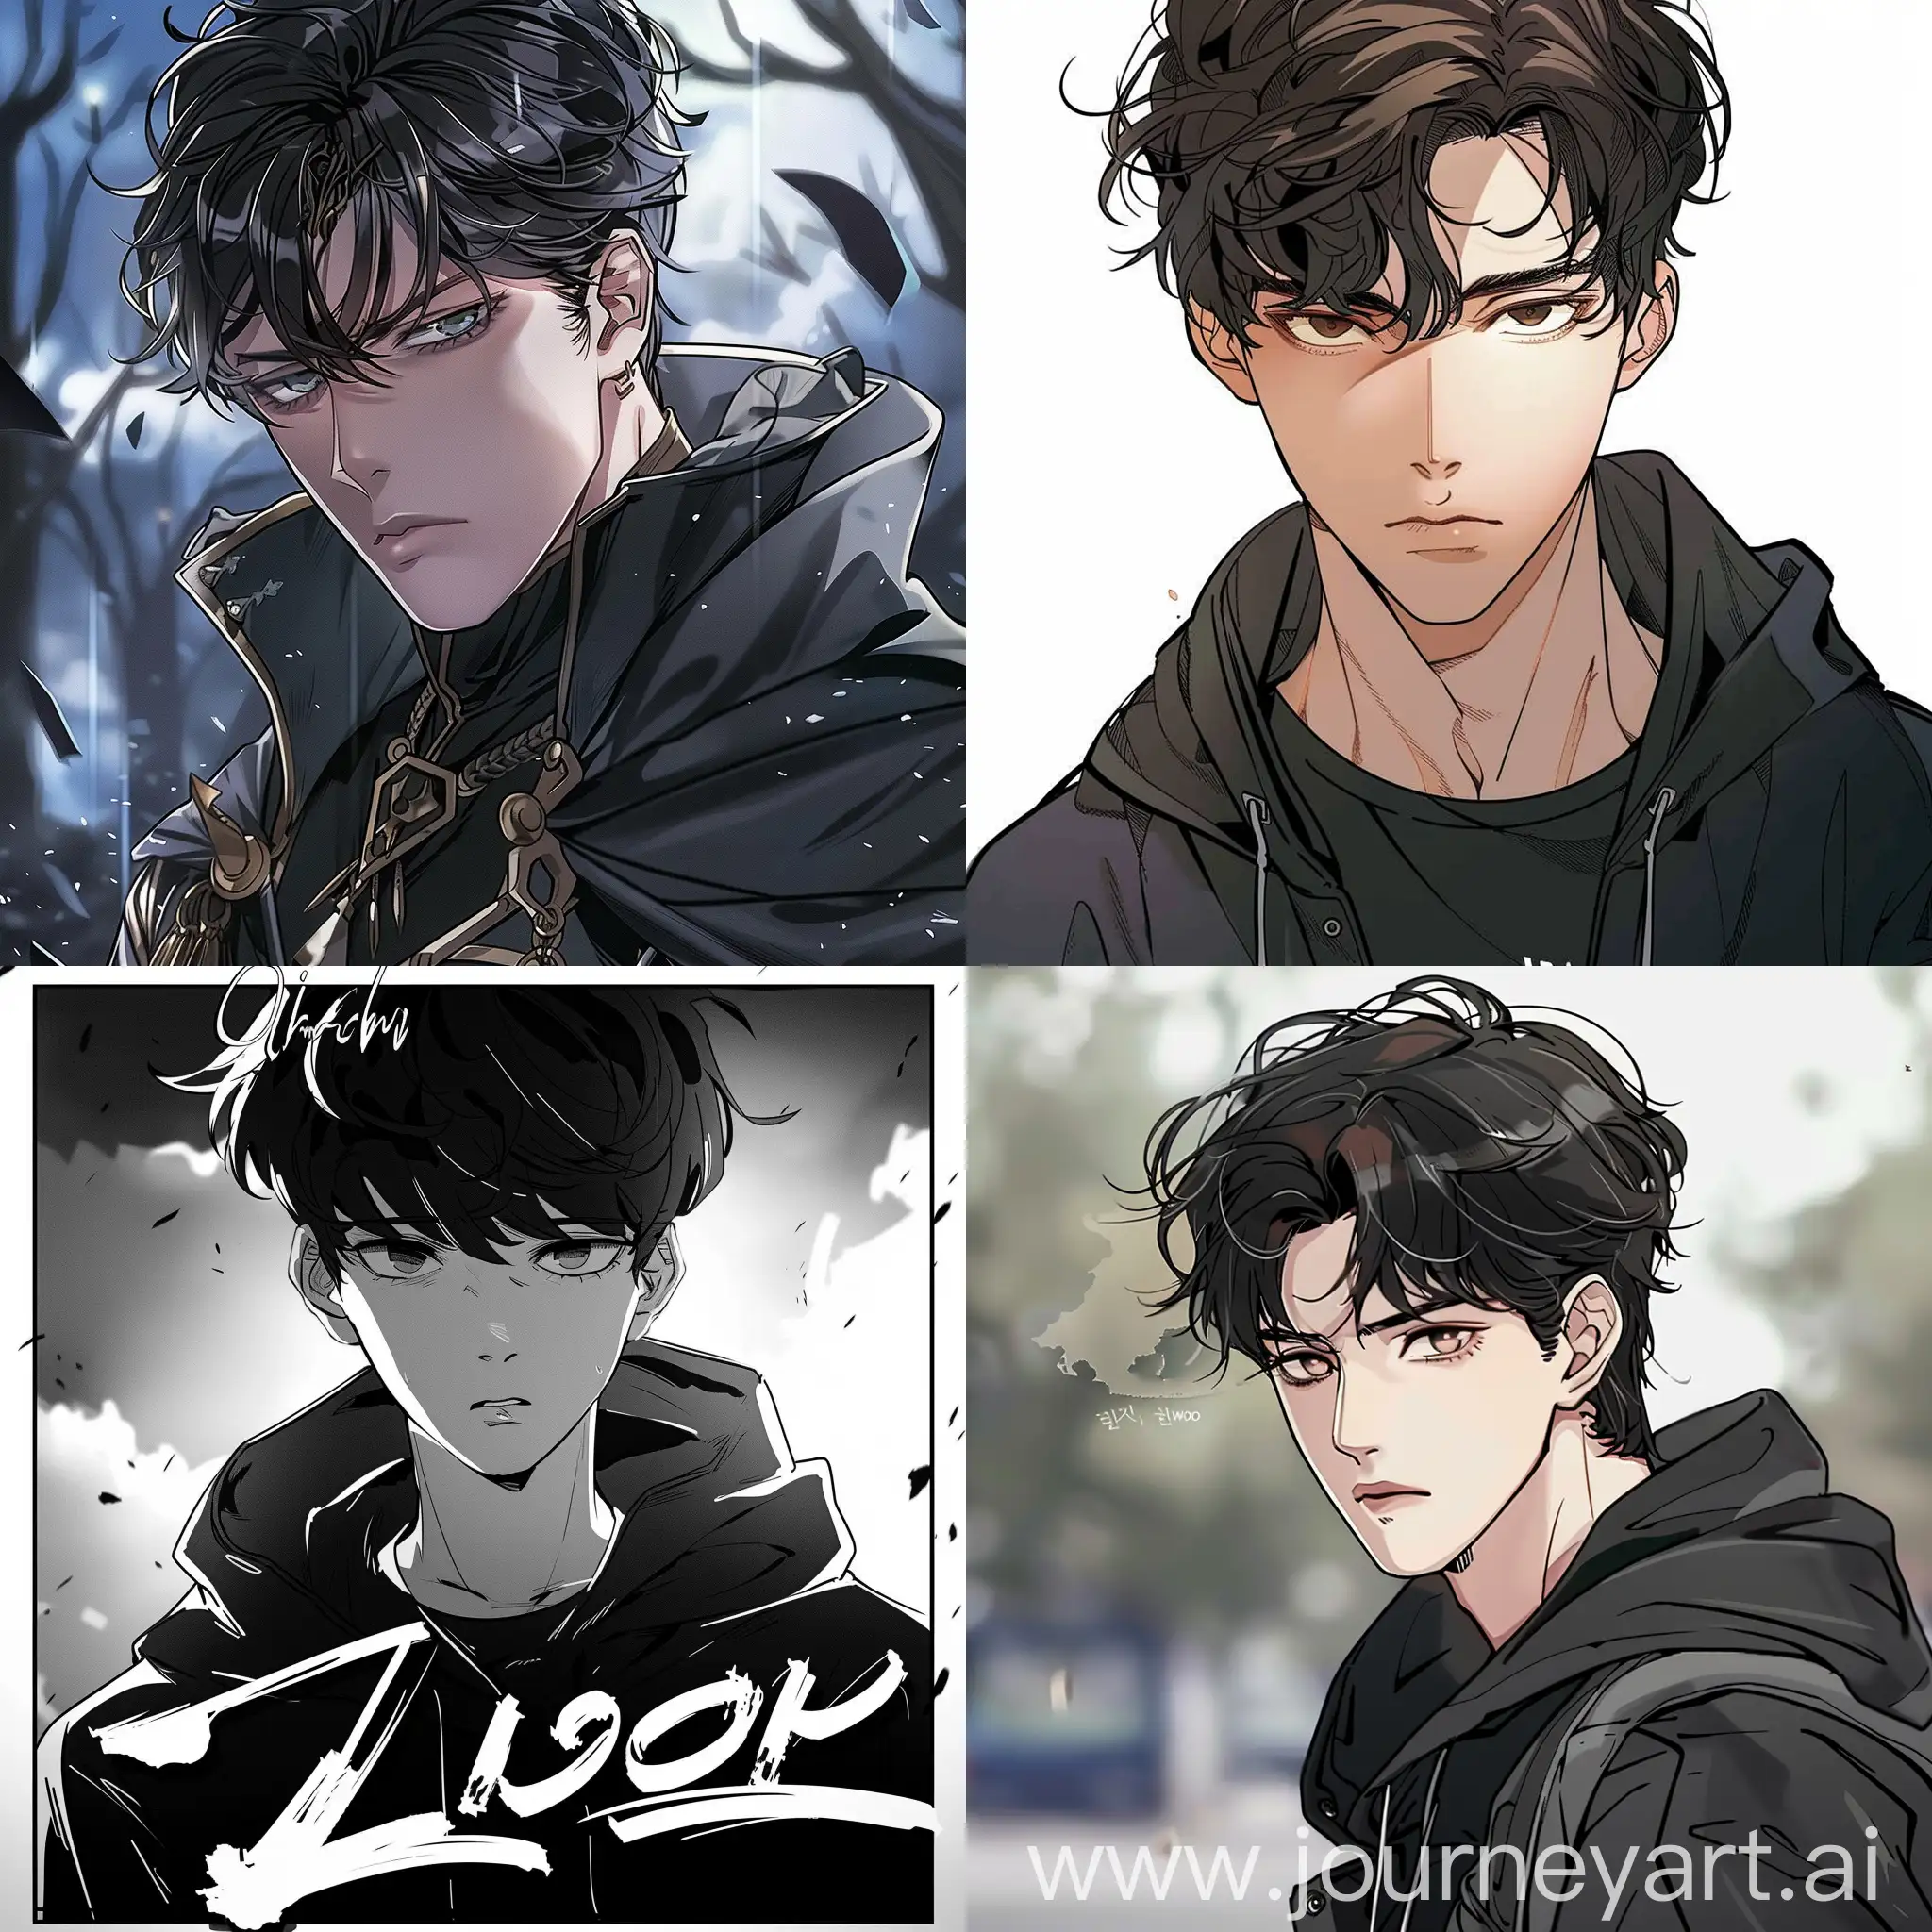 Sung-Jin-Woo-Solo-Leveling-Manhwa-Illustration-Intense-Action-in-a-11-Aspect-Ratio